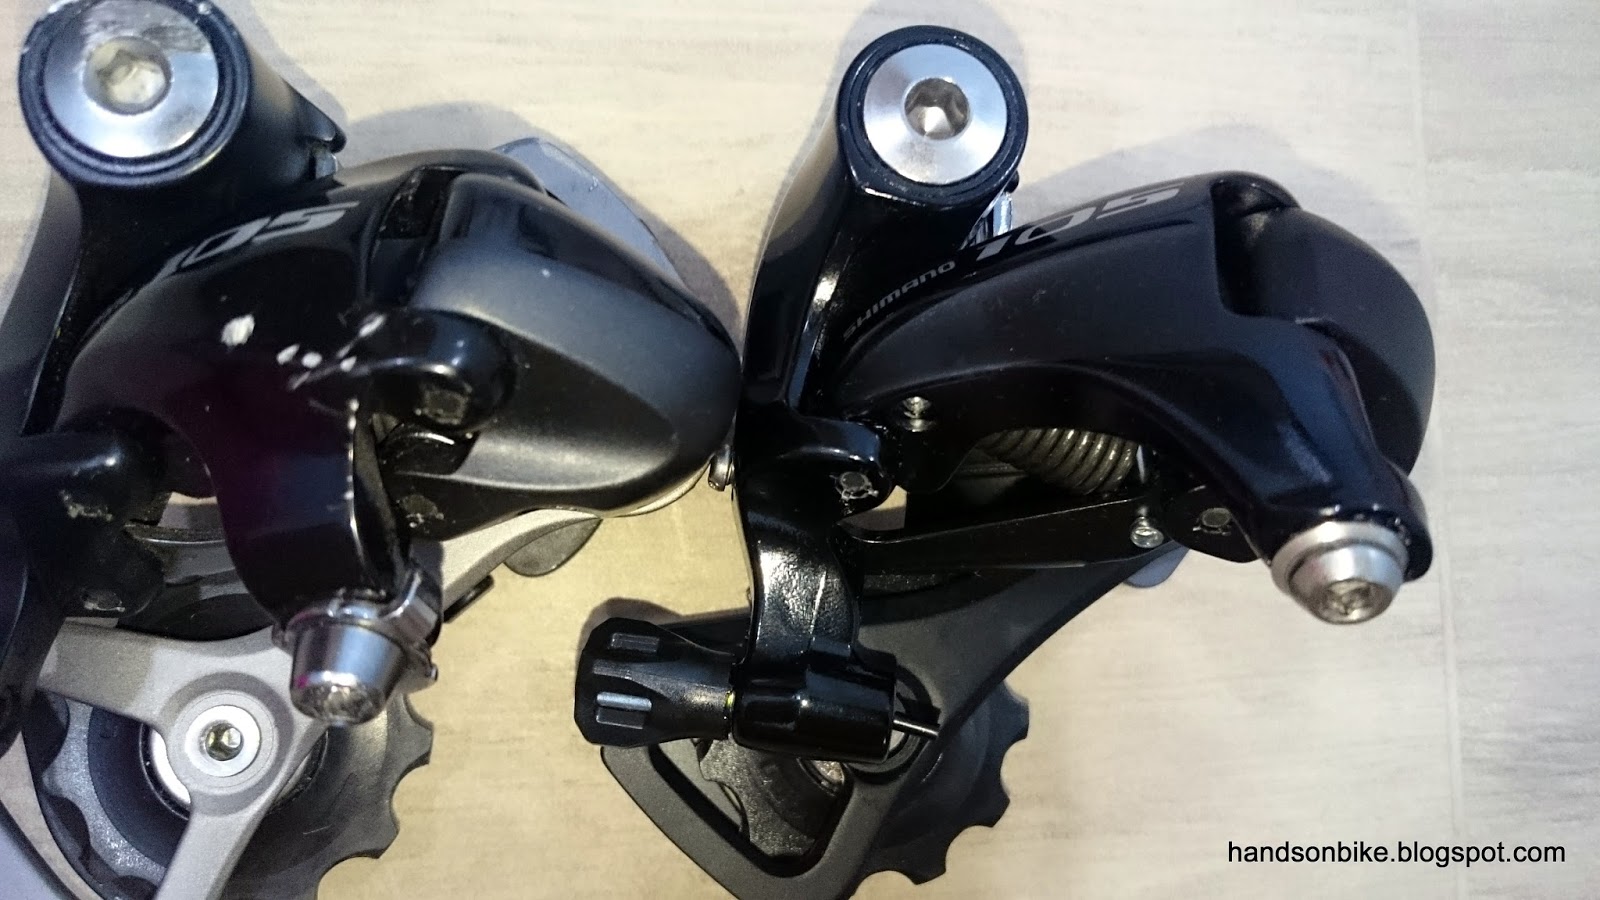 Hands On Bike: Shimano 105 5800 vs 5700: Rear Derailleur and Front 